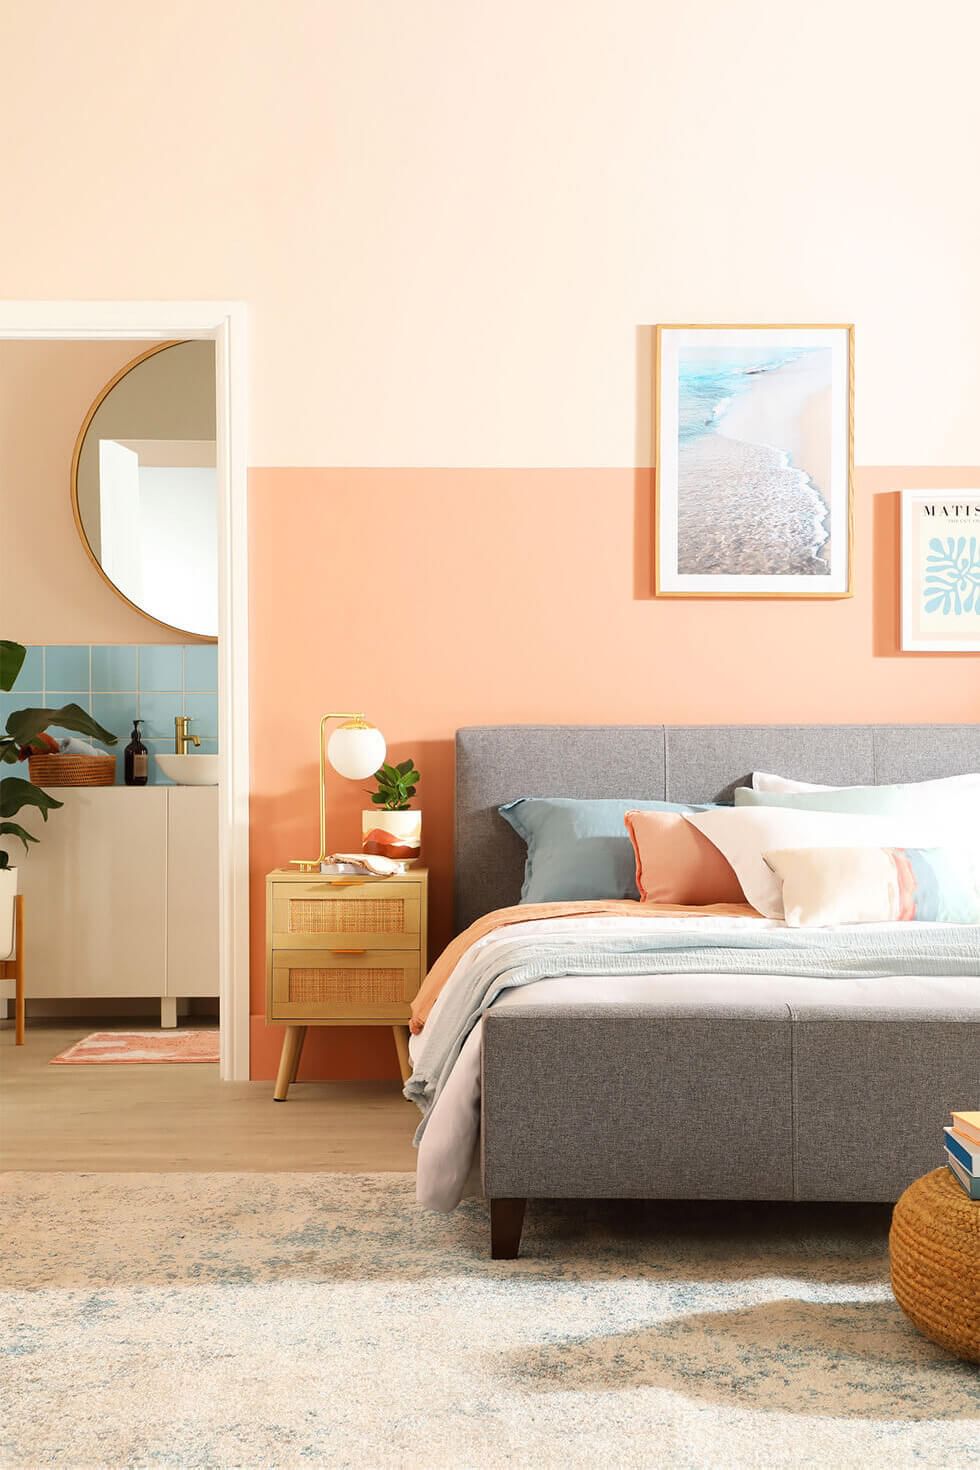 Bedroom wall painted in pantone colour of the year, peach fuzz